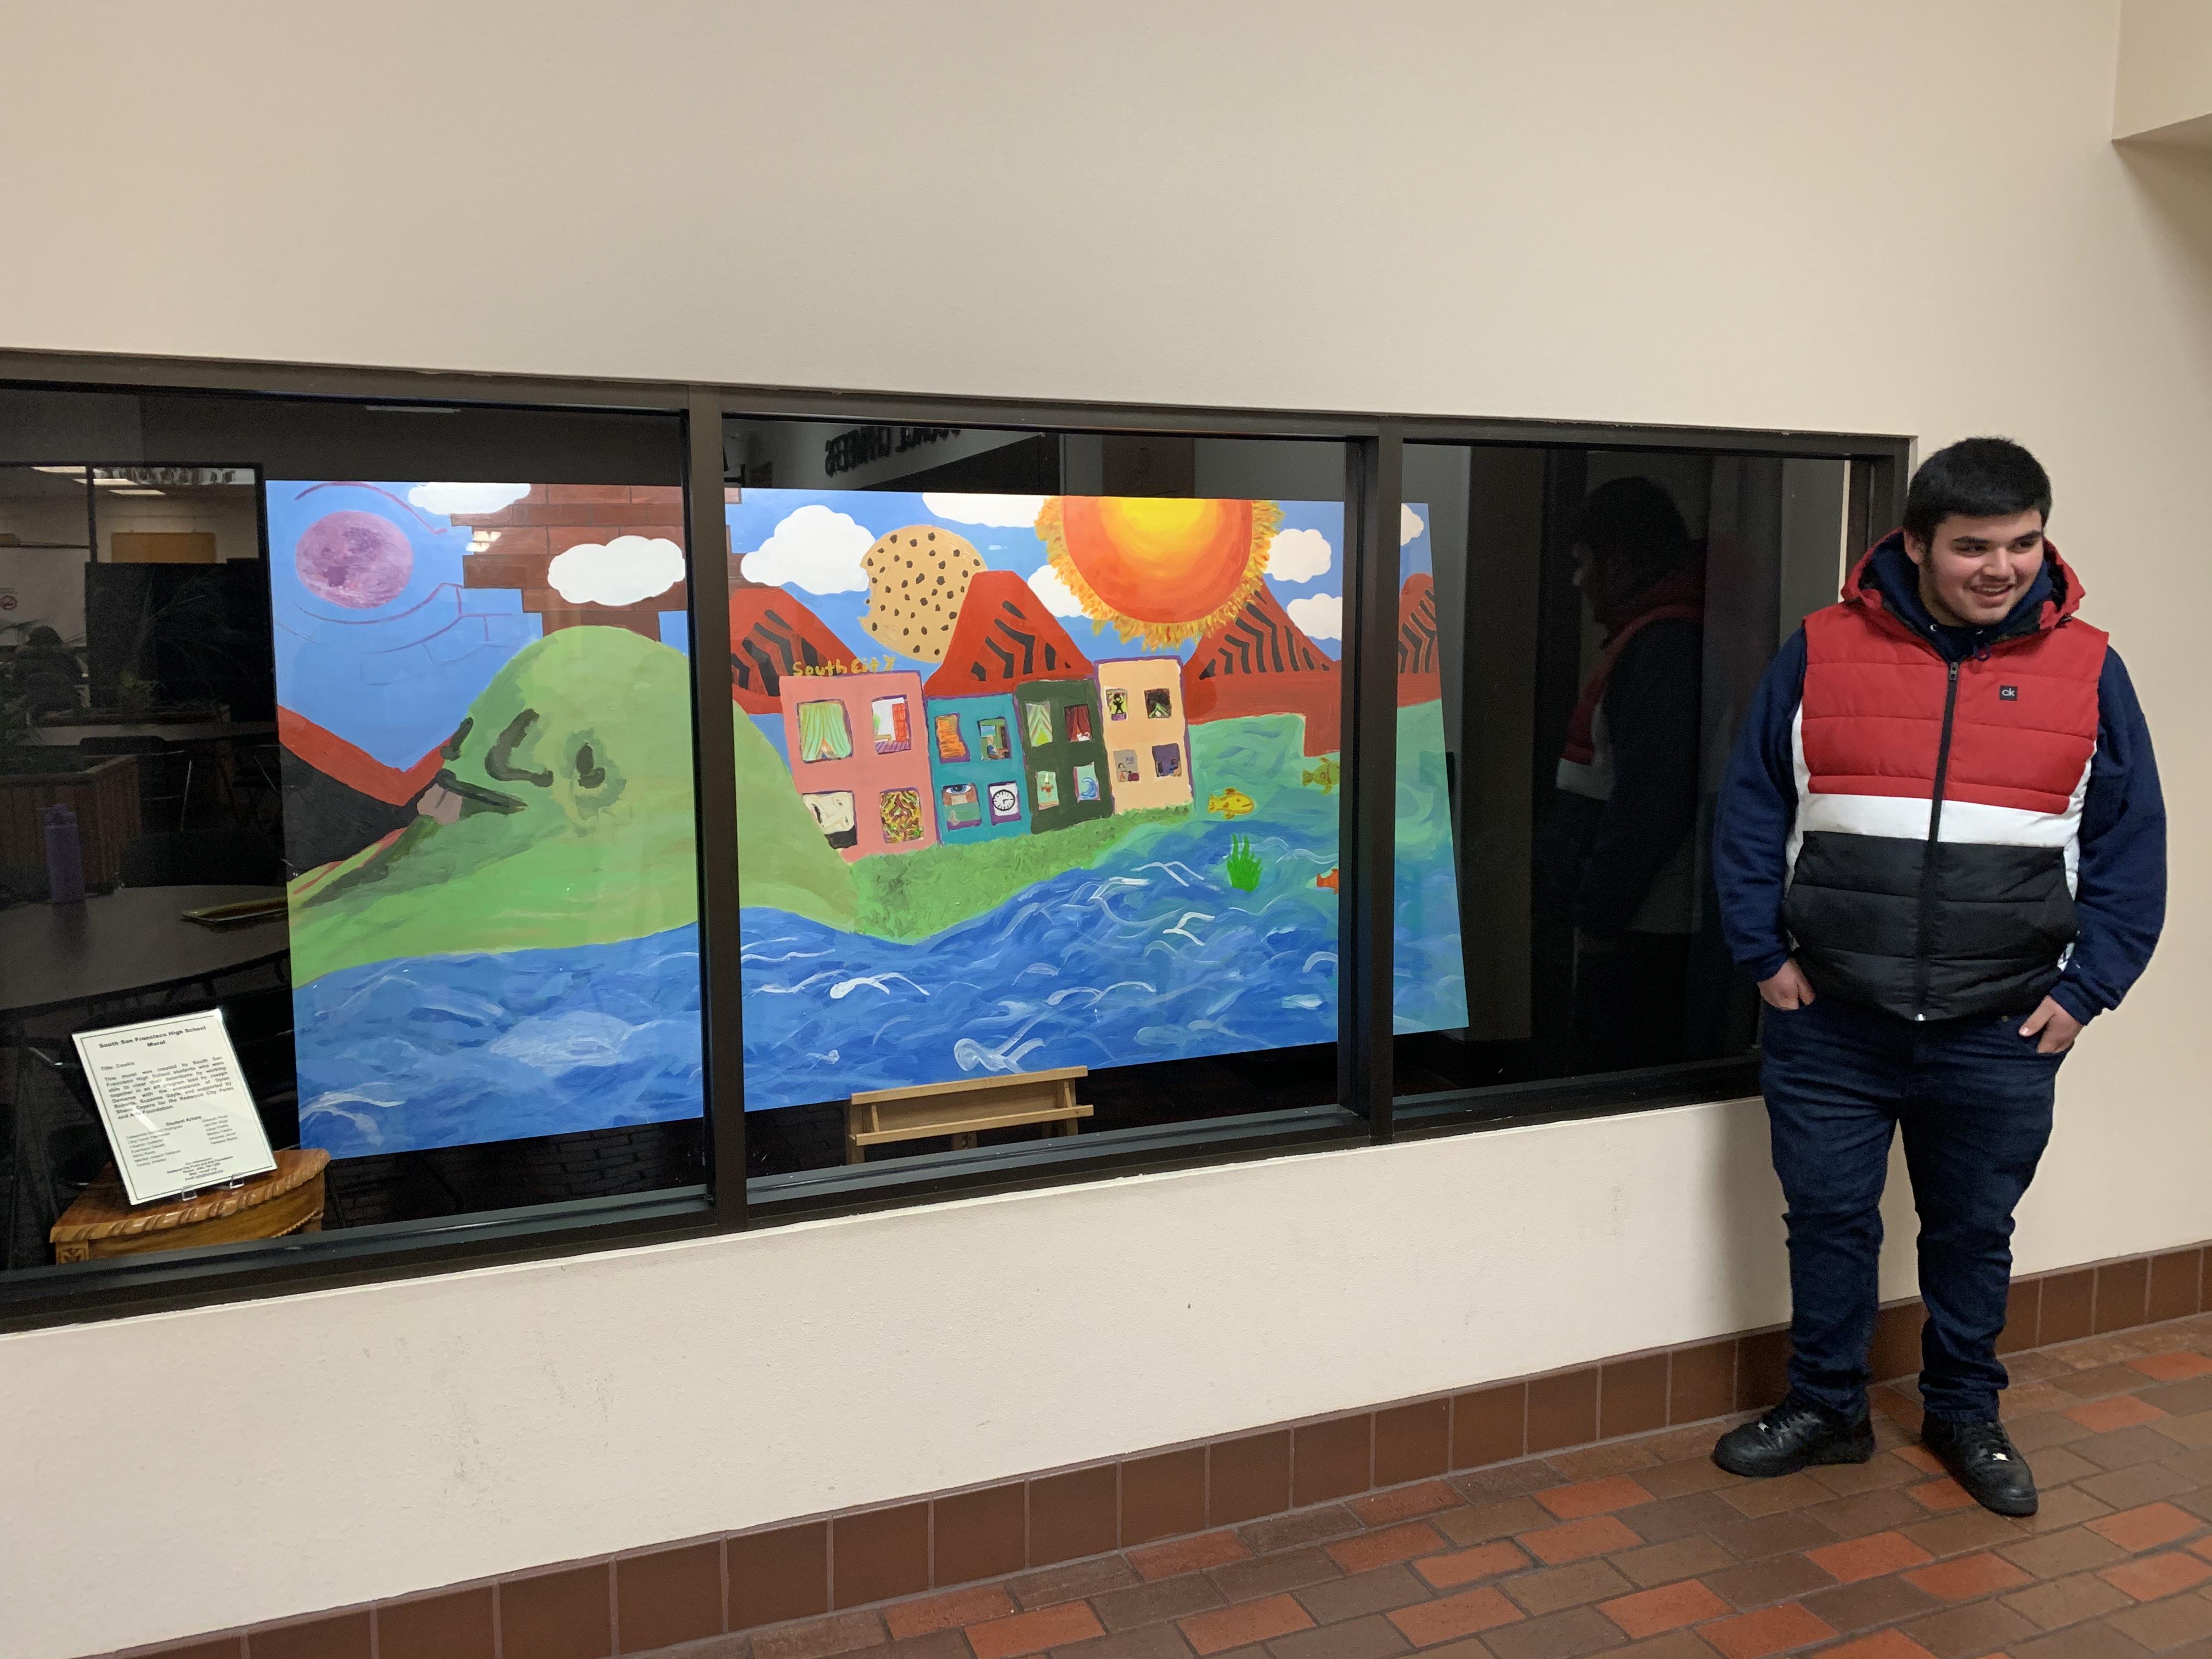 A group of 20 South San Francisco High School (SSFHS) students, who had previously received detention notices, spent 30 hours creating a mural that now hangs in the South San Francisco Municipal Services Building.